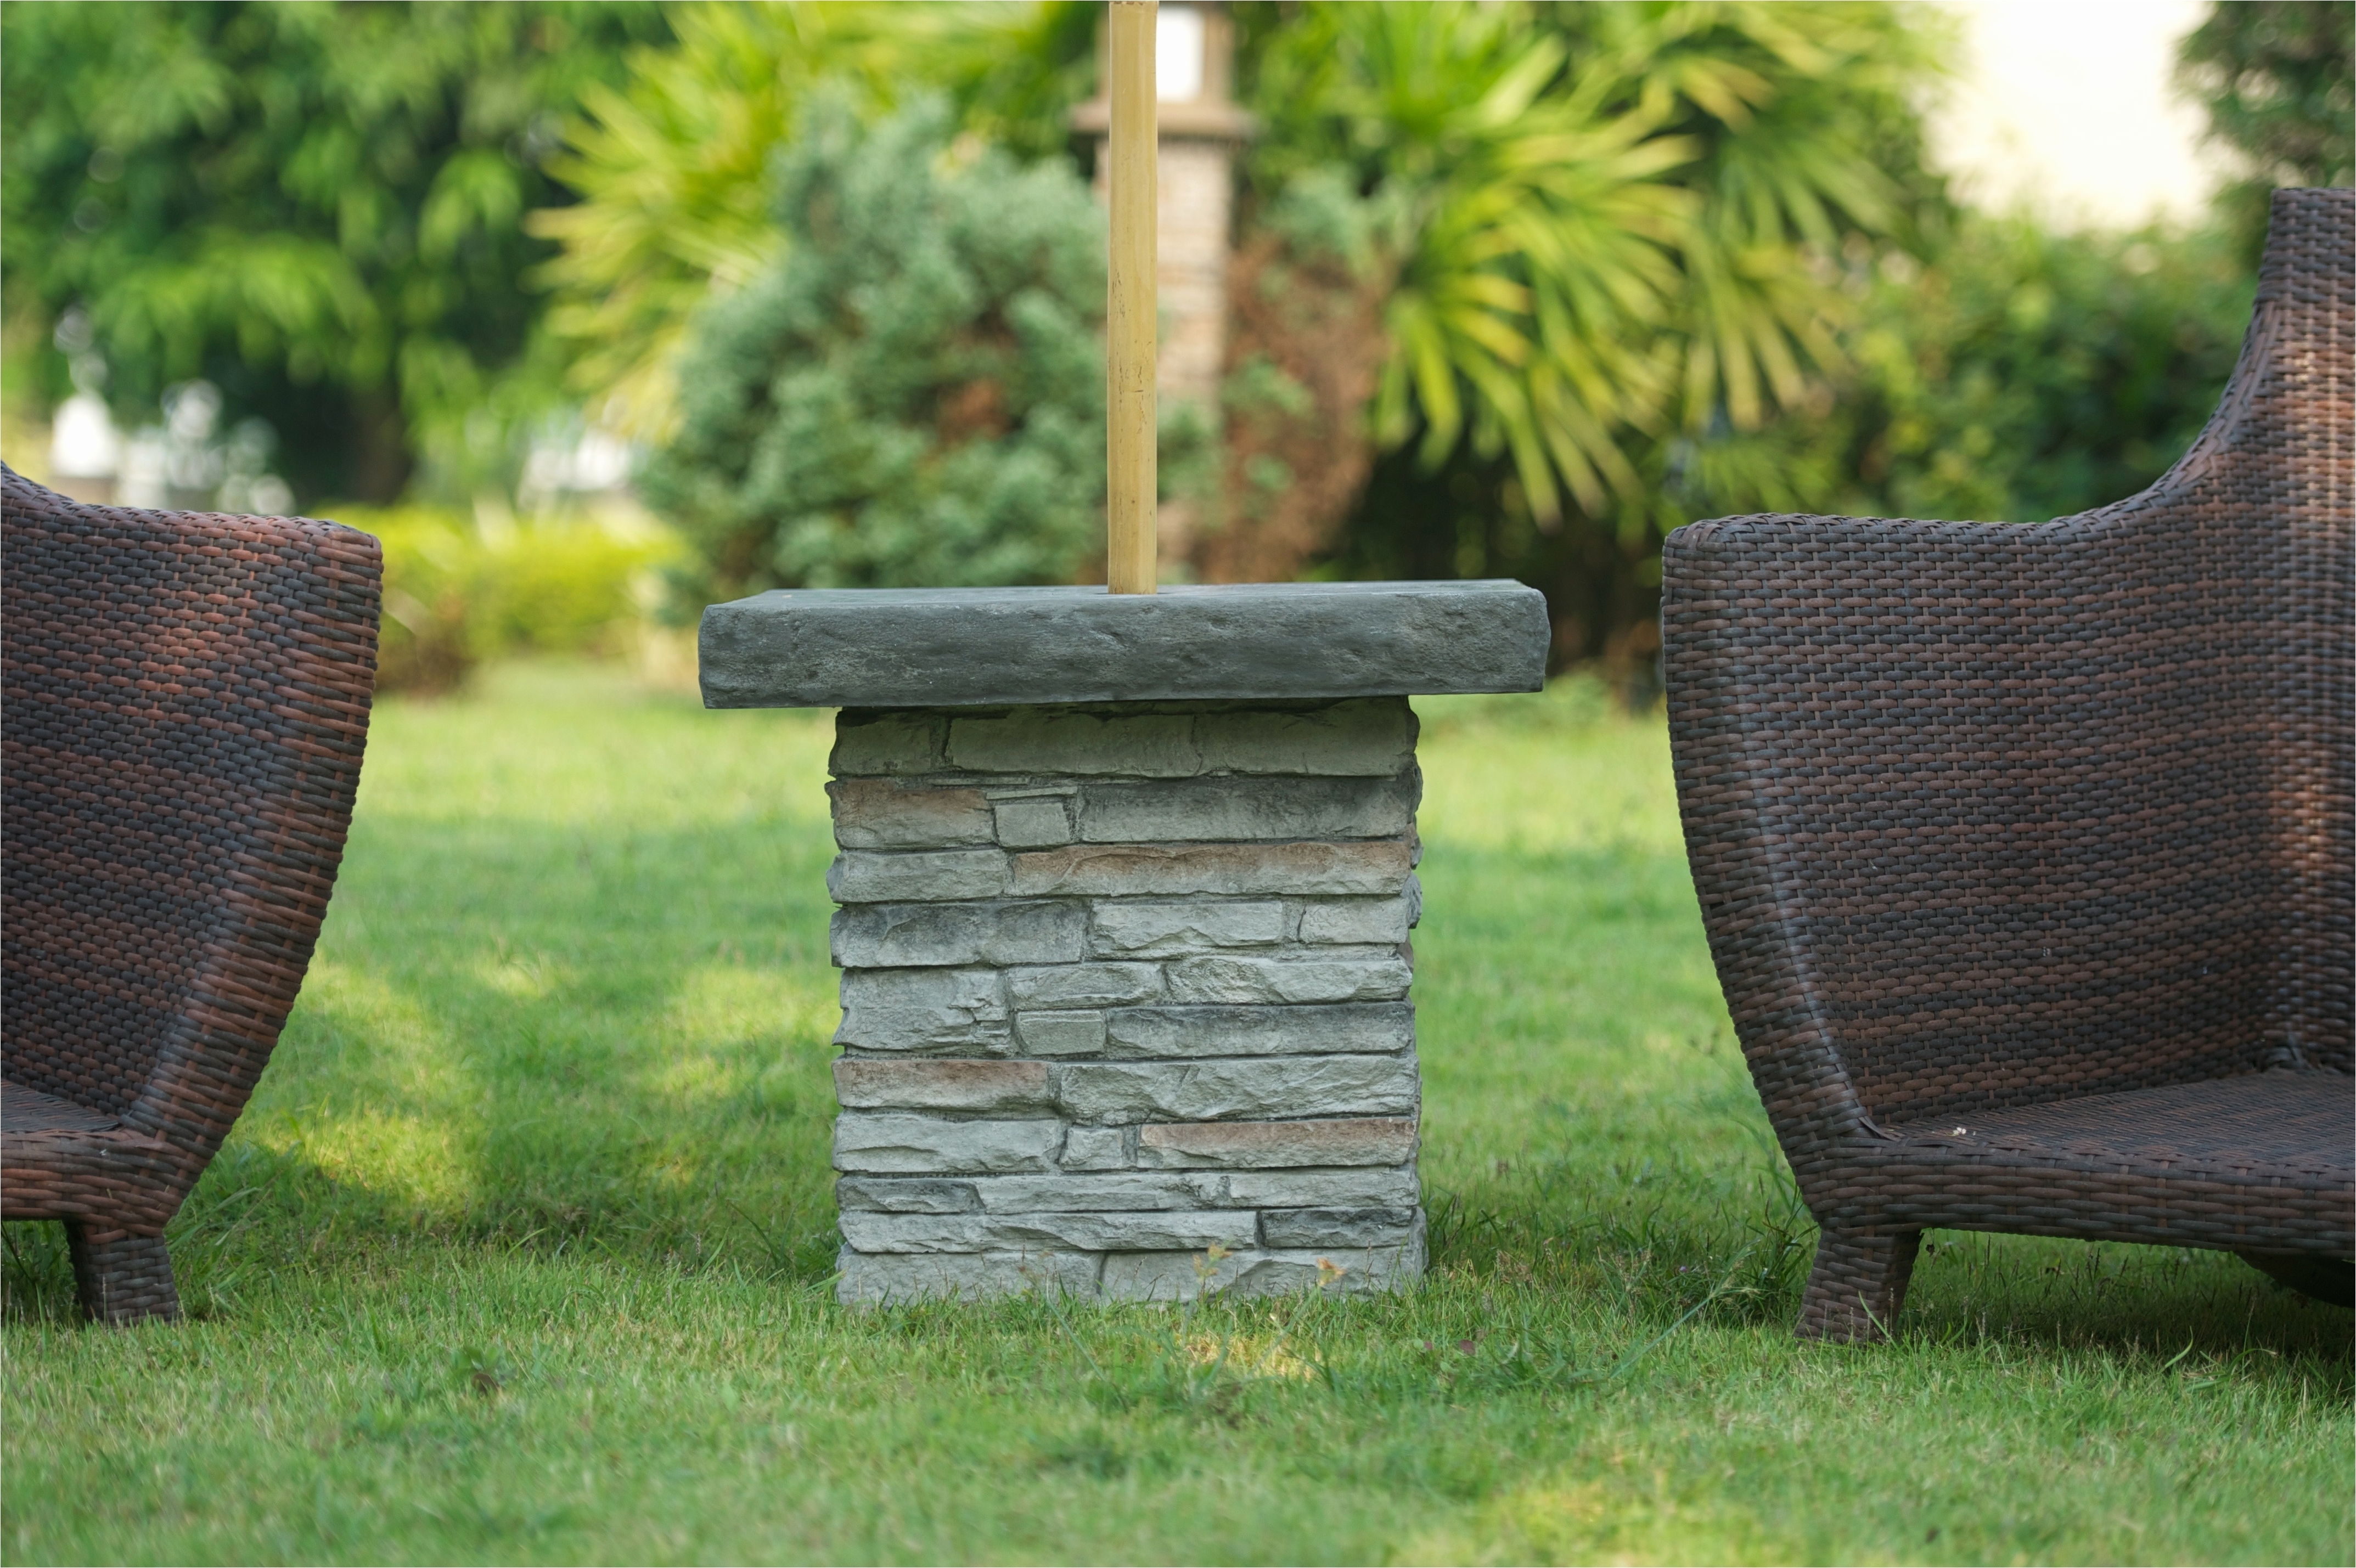 patio umbrella stand large charcoal outdoor the home redesign and side table modern with little more decorative target gold drum wicker rattan end tables maple furniture